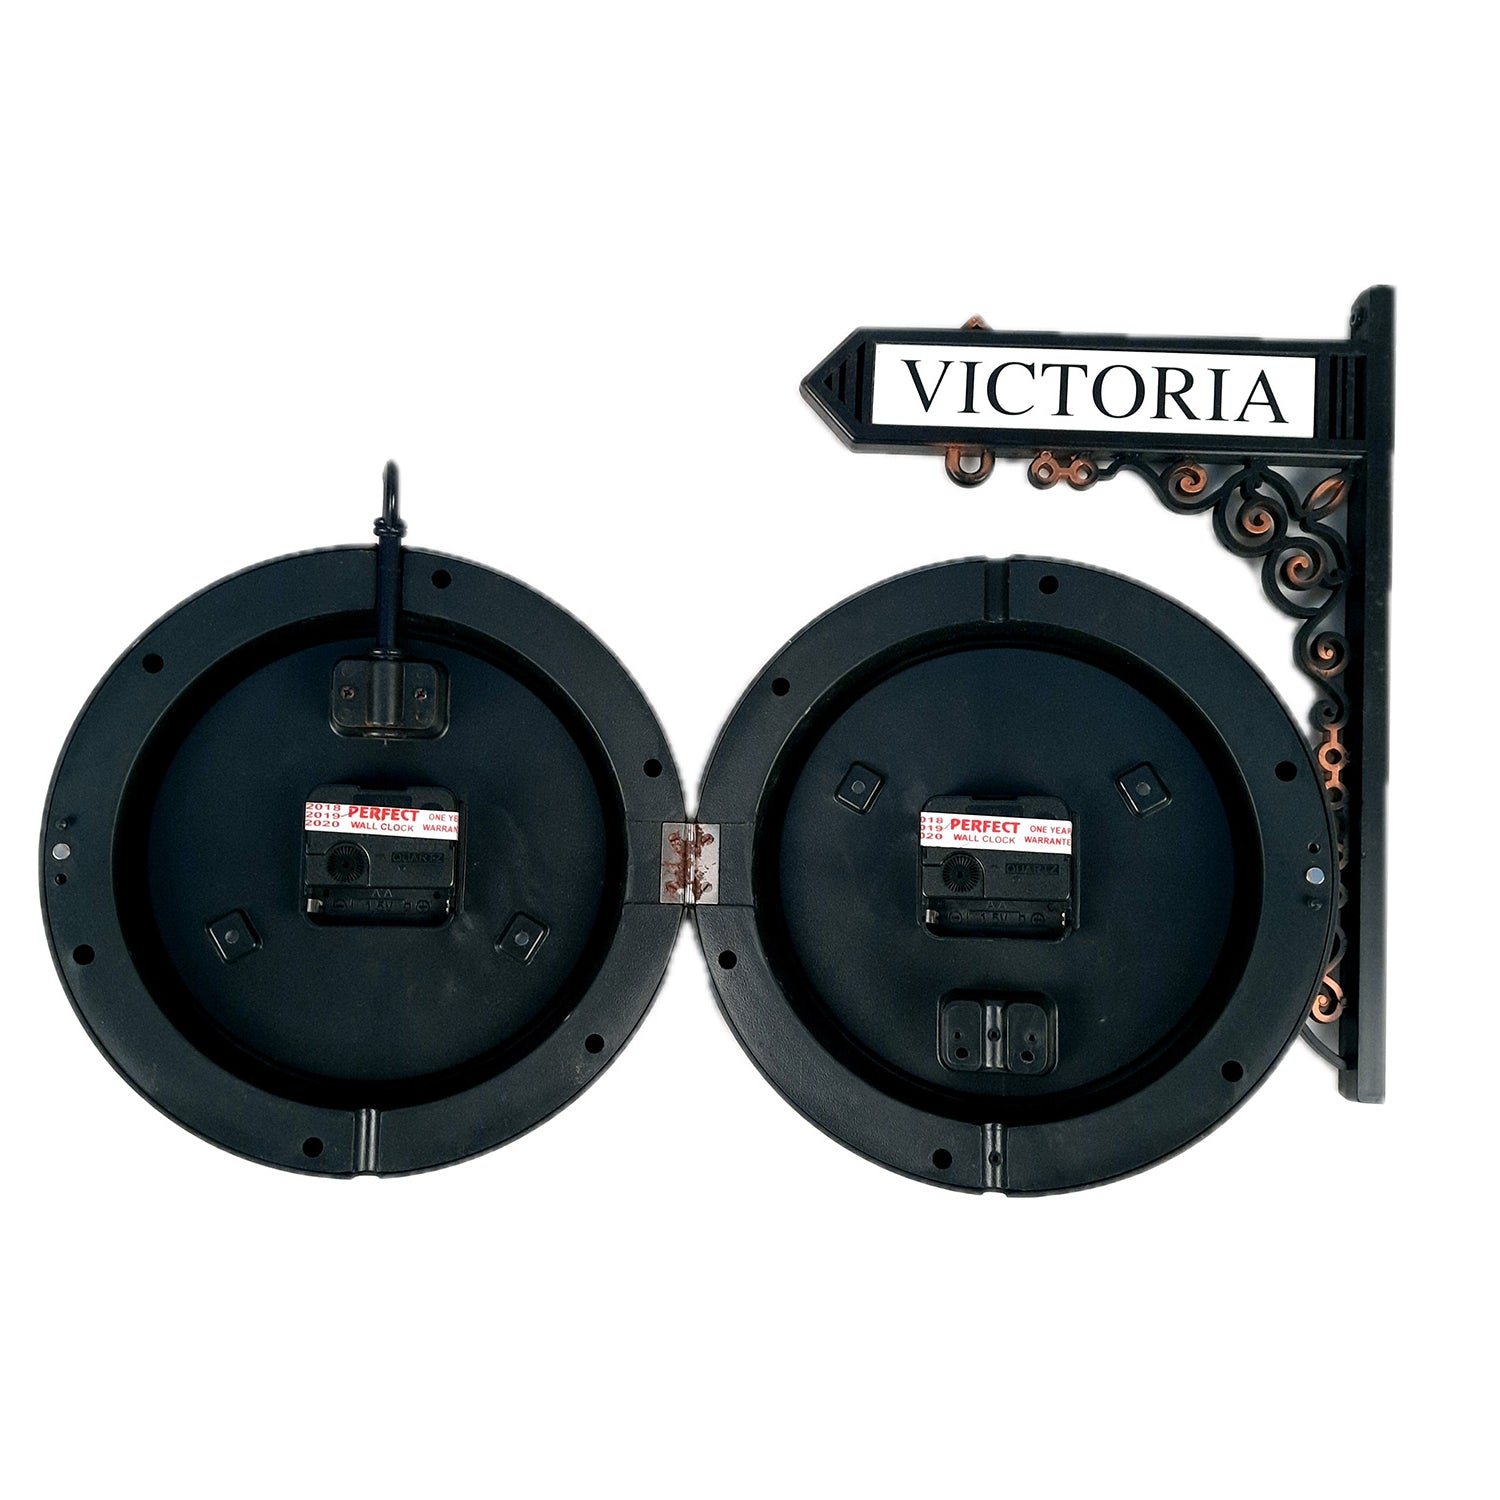 Railway Clocks - Double Sided | Victorian Station Wall Hanging Clock | Vintage Platform Watch - for Home, Living Room, Office Decor & Gifts - 11 Inch - Apkamart #Color_Black